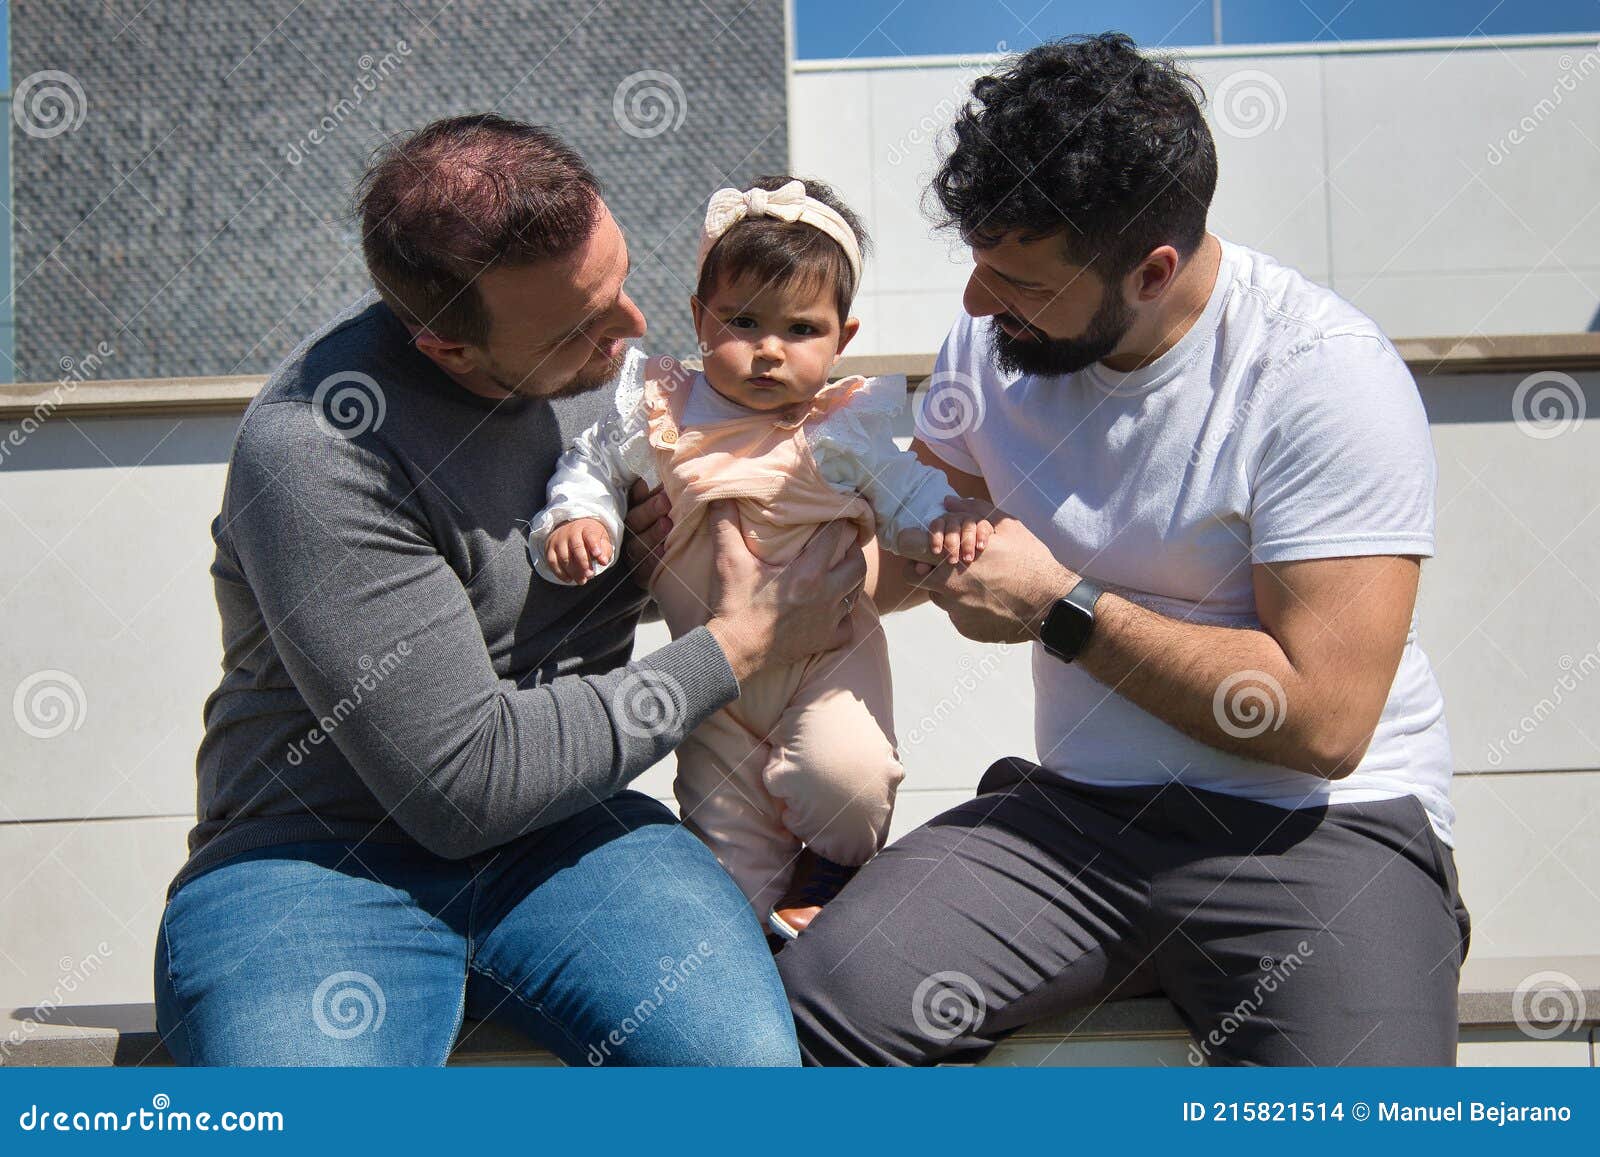 Gay Married Couple Playing Their Daughter Very Happily in the Open Air Stock Photo